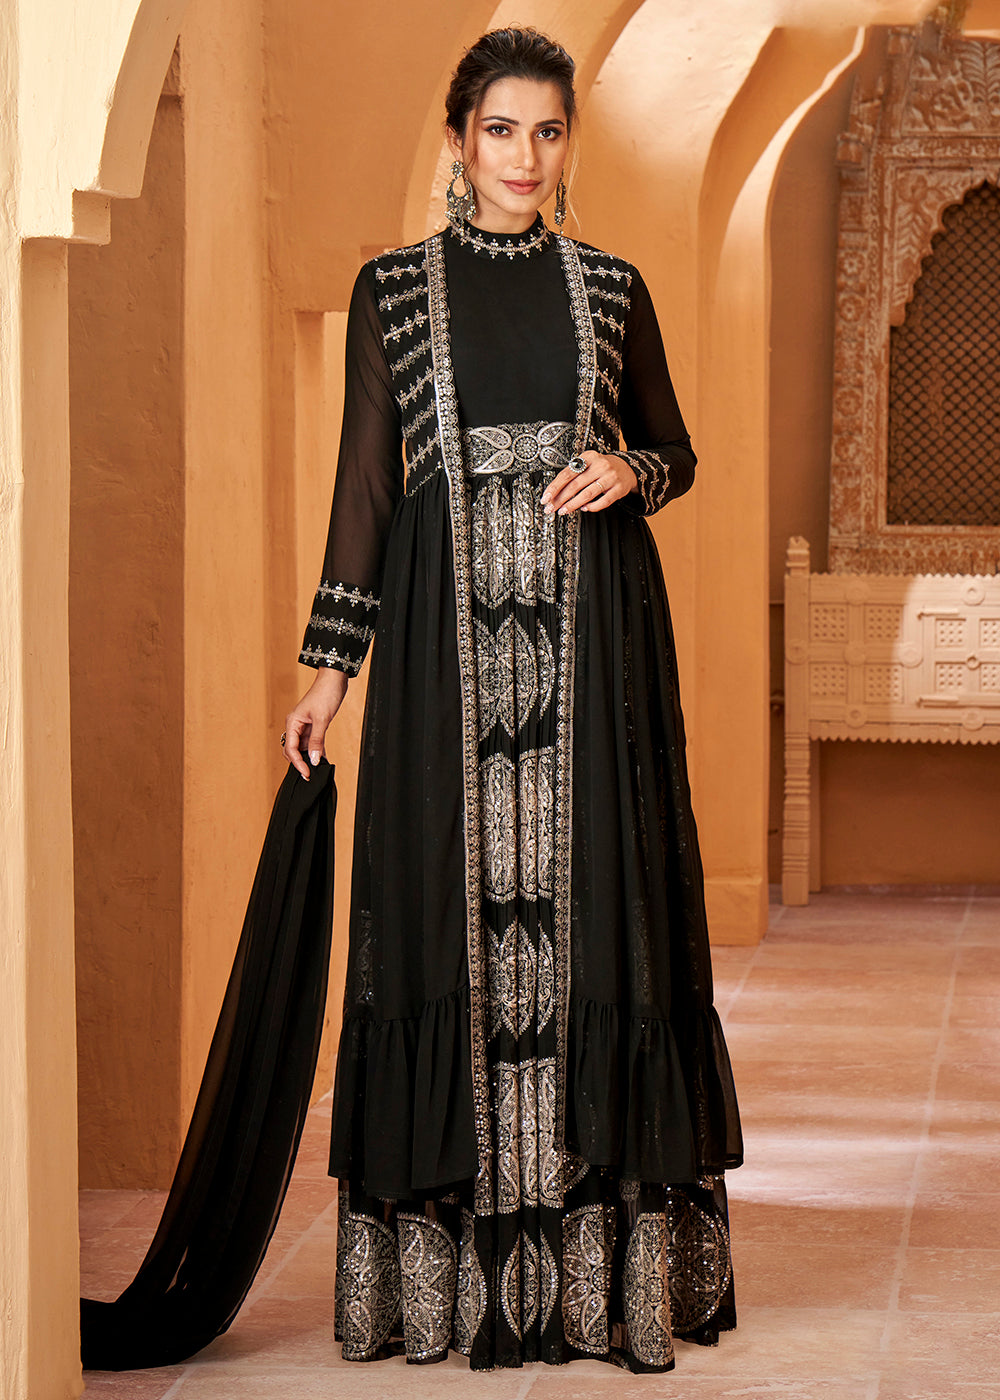 Buy Now Party Wear Divine Charcoal Black Jacket Style Anarkali Dress Online in USA, UK, Australia, New Zealand, Canada & Worldwide at Empress Clothing.